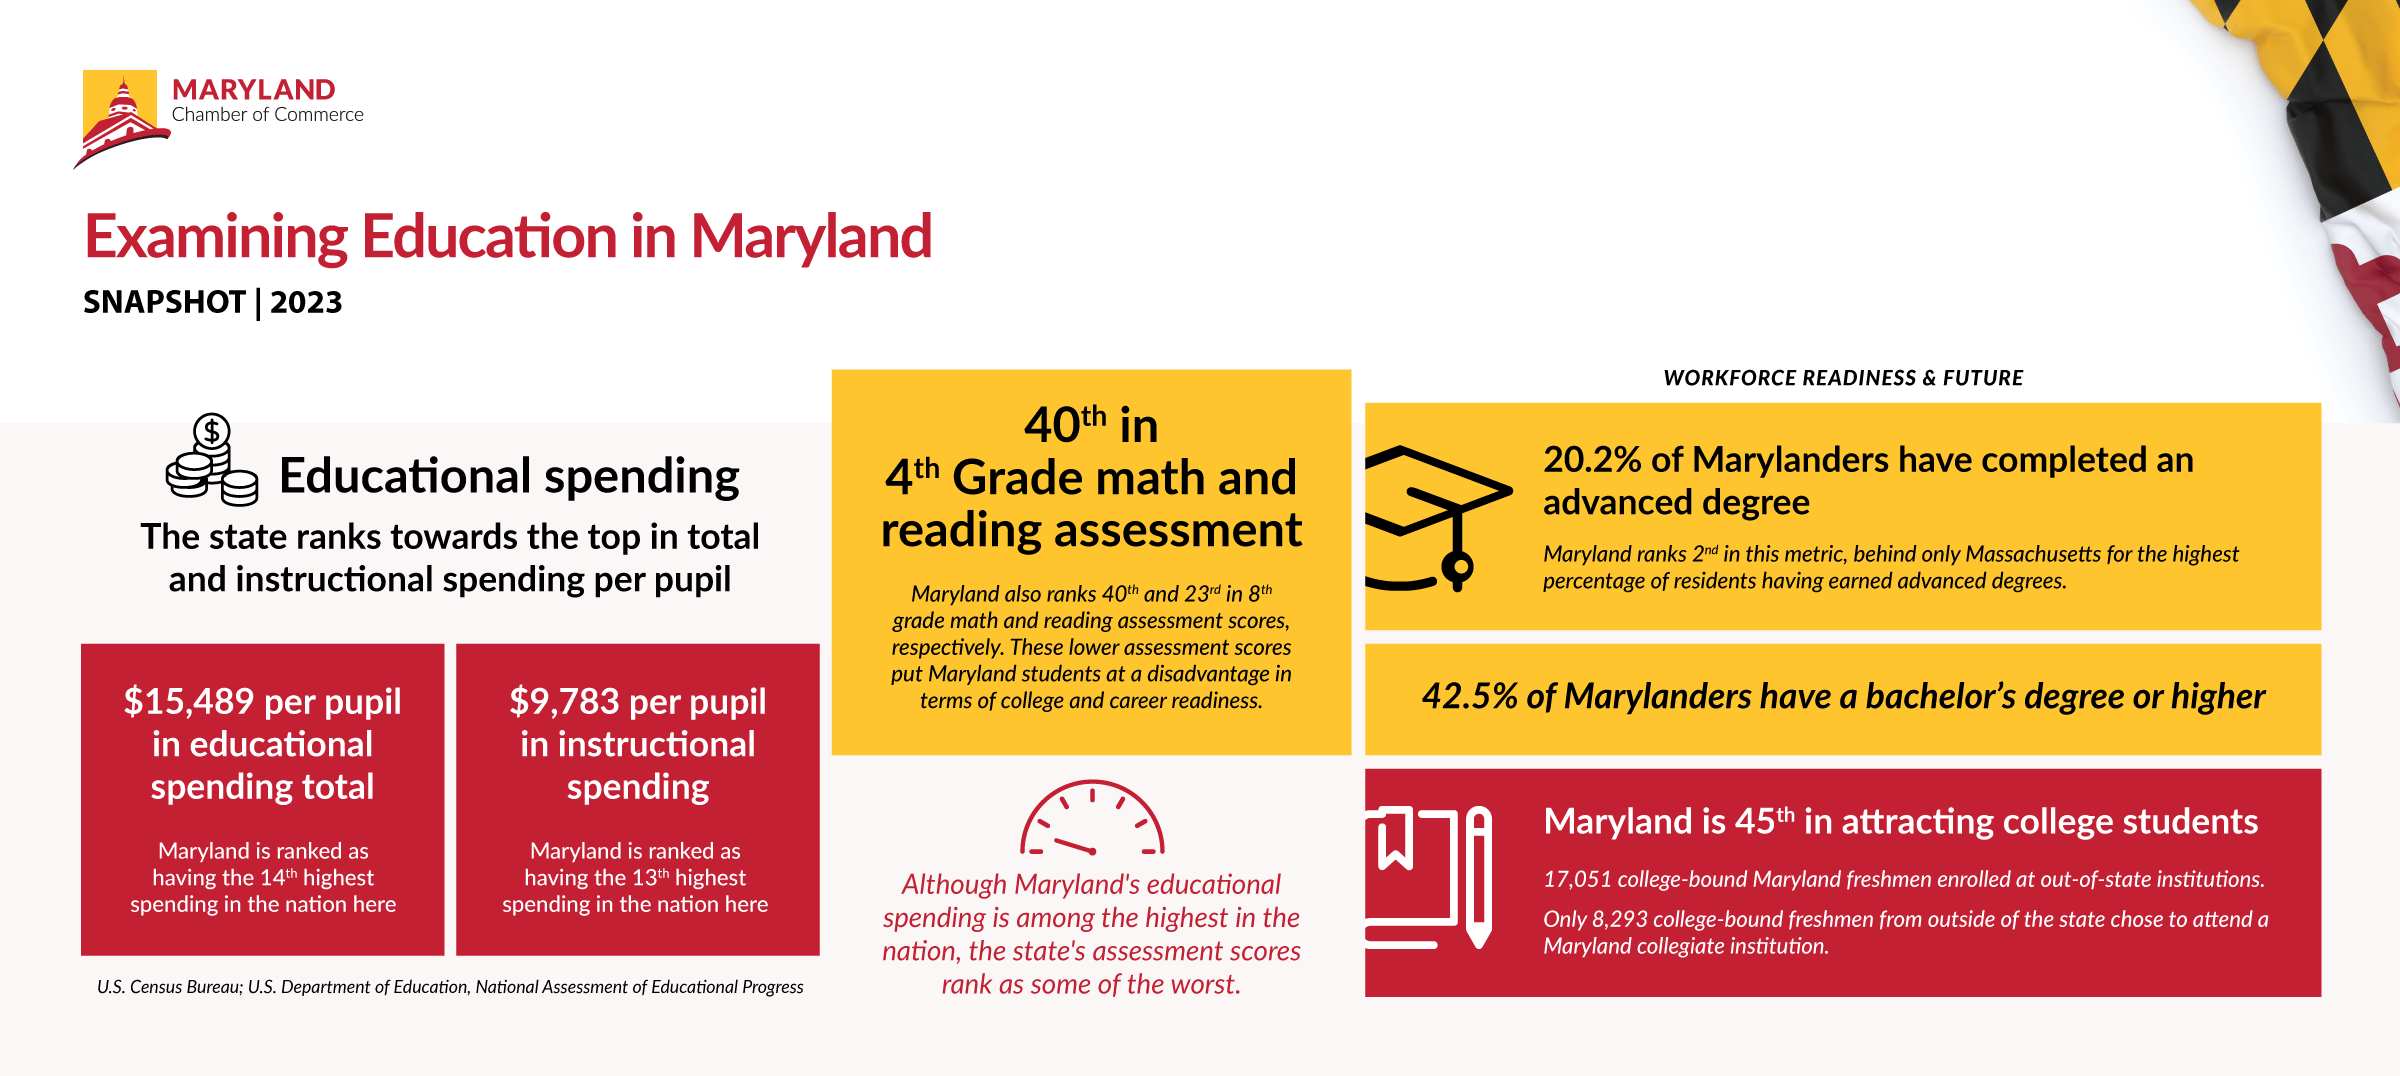 An infographic that demonstrates a variety of rankings regarding Maryland's education indicators vs. other states across the nation, including: Maryland ranks towards the top in the nation in total and instructional spending per pupil, with $15,489 per pupil in educational spending total (Maryland is ranked as having the 14th highest spending in the nation here), and $9,789 per pupil in instructional spending (Maryland is ranked as having the 13th highest spending in the nation here). Maryland is ranked 40th in 4th Grade math and reading assessment. Maryland also ranks 40th and 23rd in 8th grade math and reading assessment scores, respectively. These lower assessment scores put Maryland at a disadvantage in terms of college and career readiness. Although Maryland's educational spending is among the highest in the nation, the state's assessment scores are some of the worst. When it comes to workforce readiness and future: 20.2% of Marylanders have completed an advanced degree. Maryland ranks 2nd in the nation in this metric, behind only Massachusetts for the highest percentage of residents having earned advanced degrees. 42.5% of Marylanders have a bachelor's degree or higher. Maryland is ranked 45th in attracting college students. 17,051 college-bound Maryland freshmen enrolled at out-of-state institutions. Only 8,293 college-bound freshmen from outside of the state chose to attend a Maryland collegiate institution.